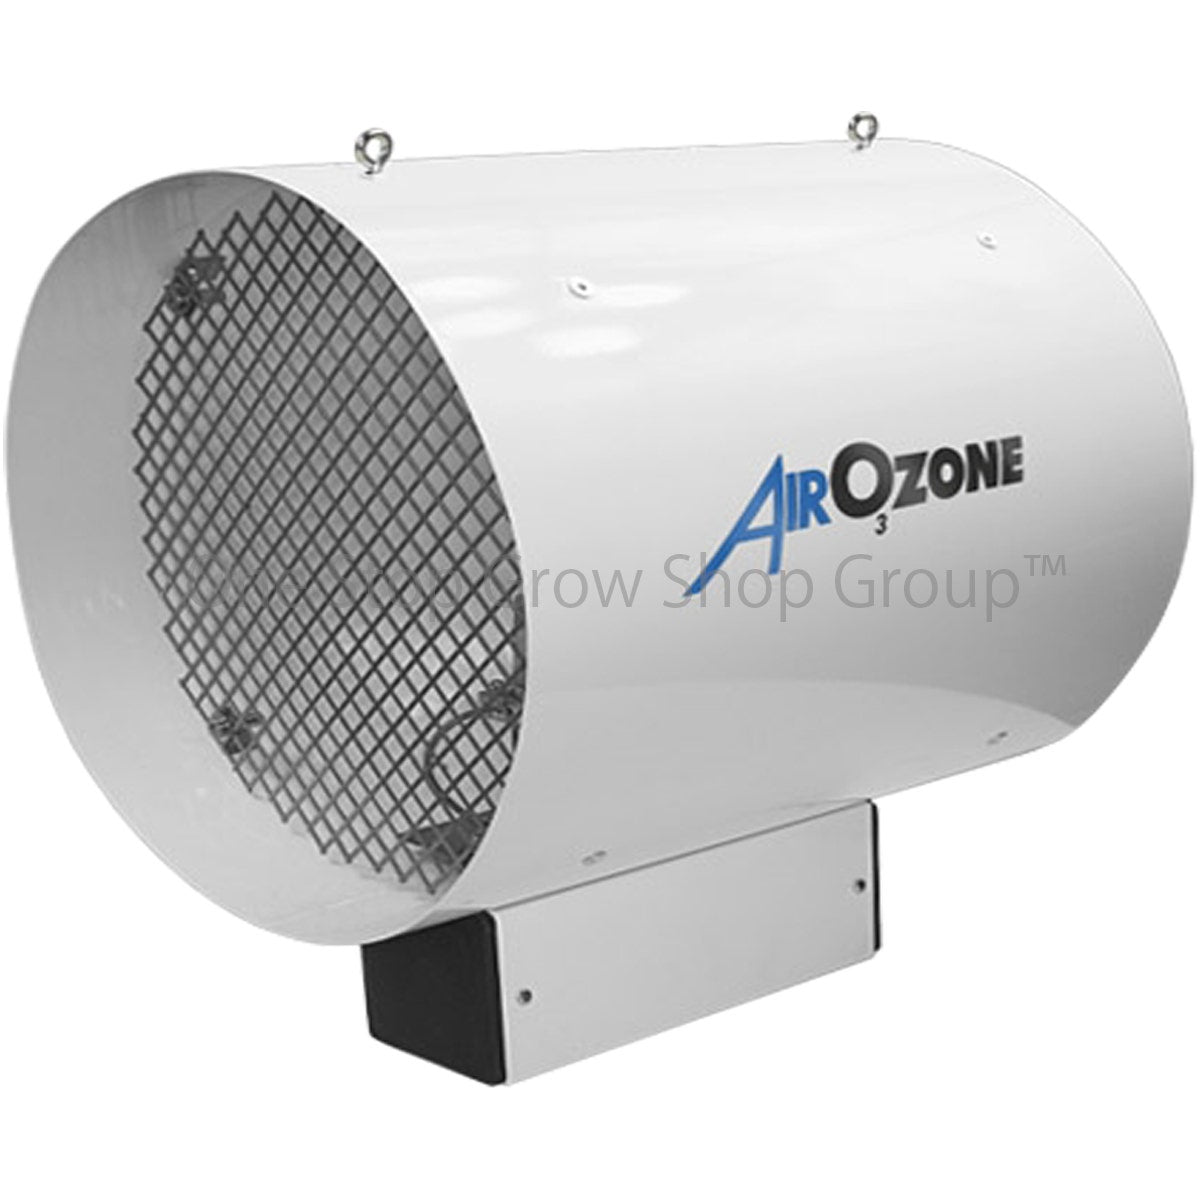 G.A.S AirOzone In-Duct Ozone Generator